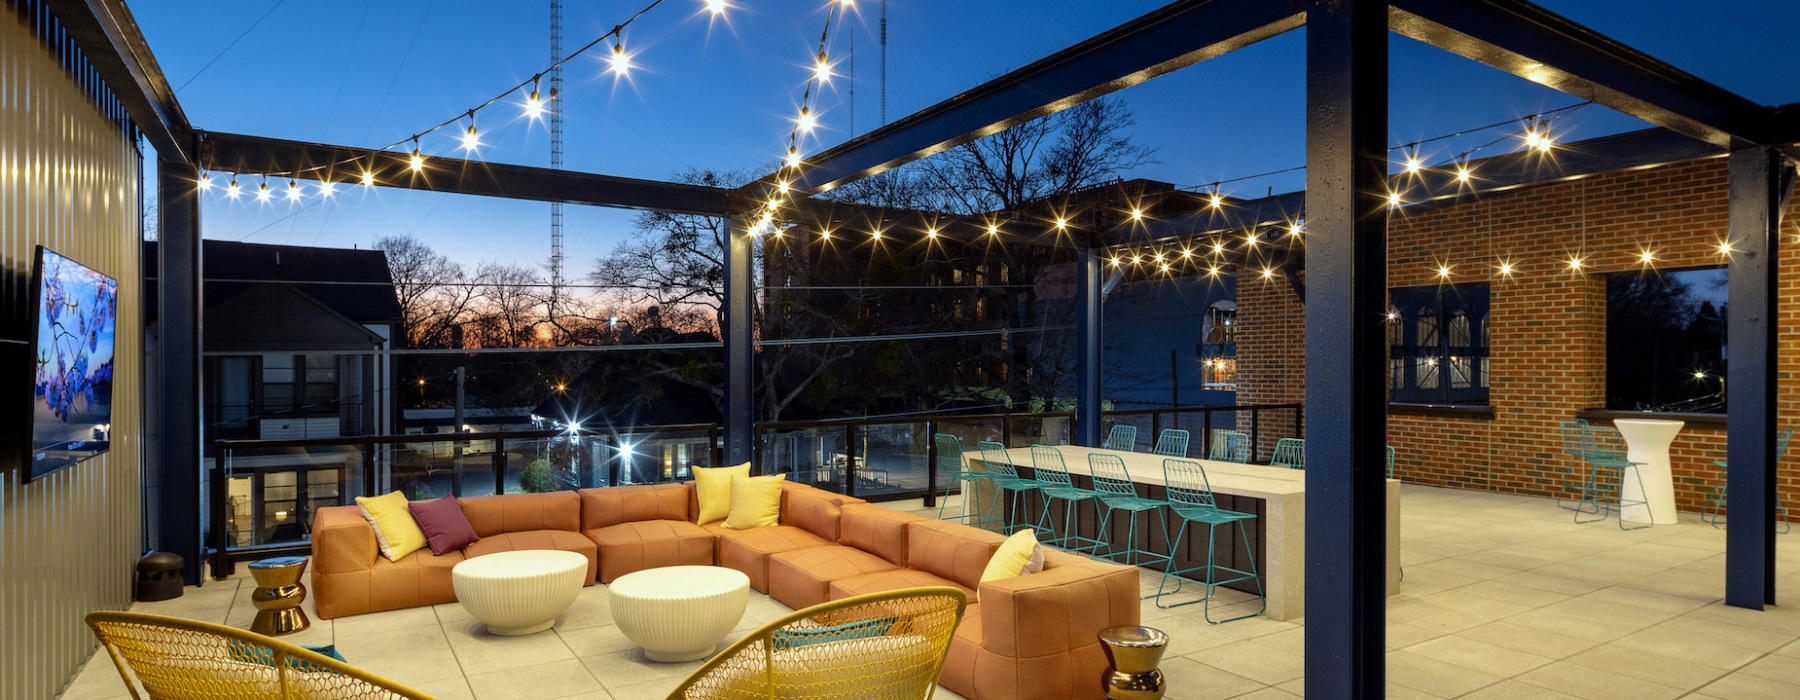 rooftop with seating, televisions and bartop area